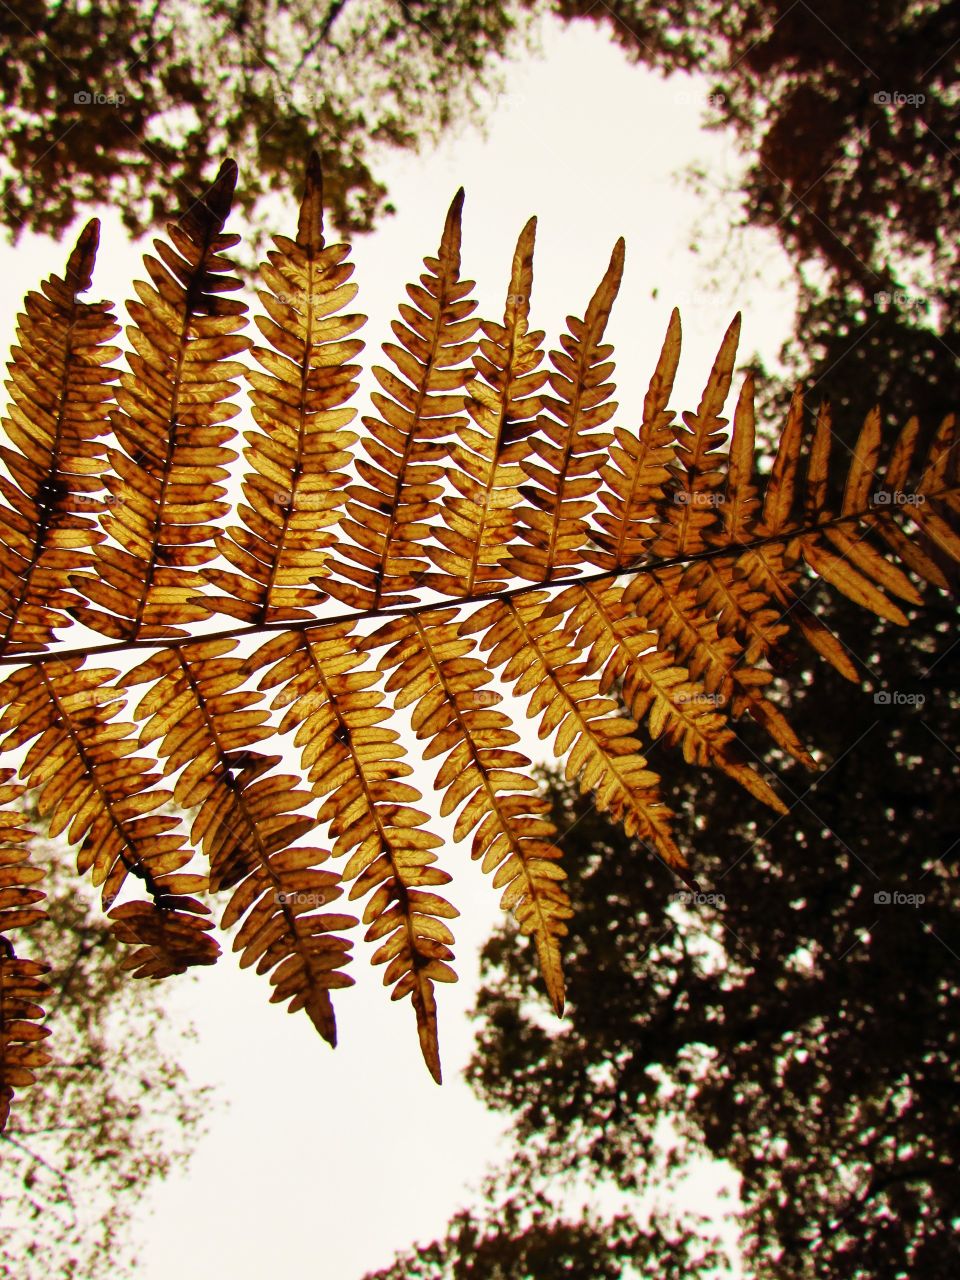 Low angle view of an autumn fern